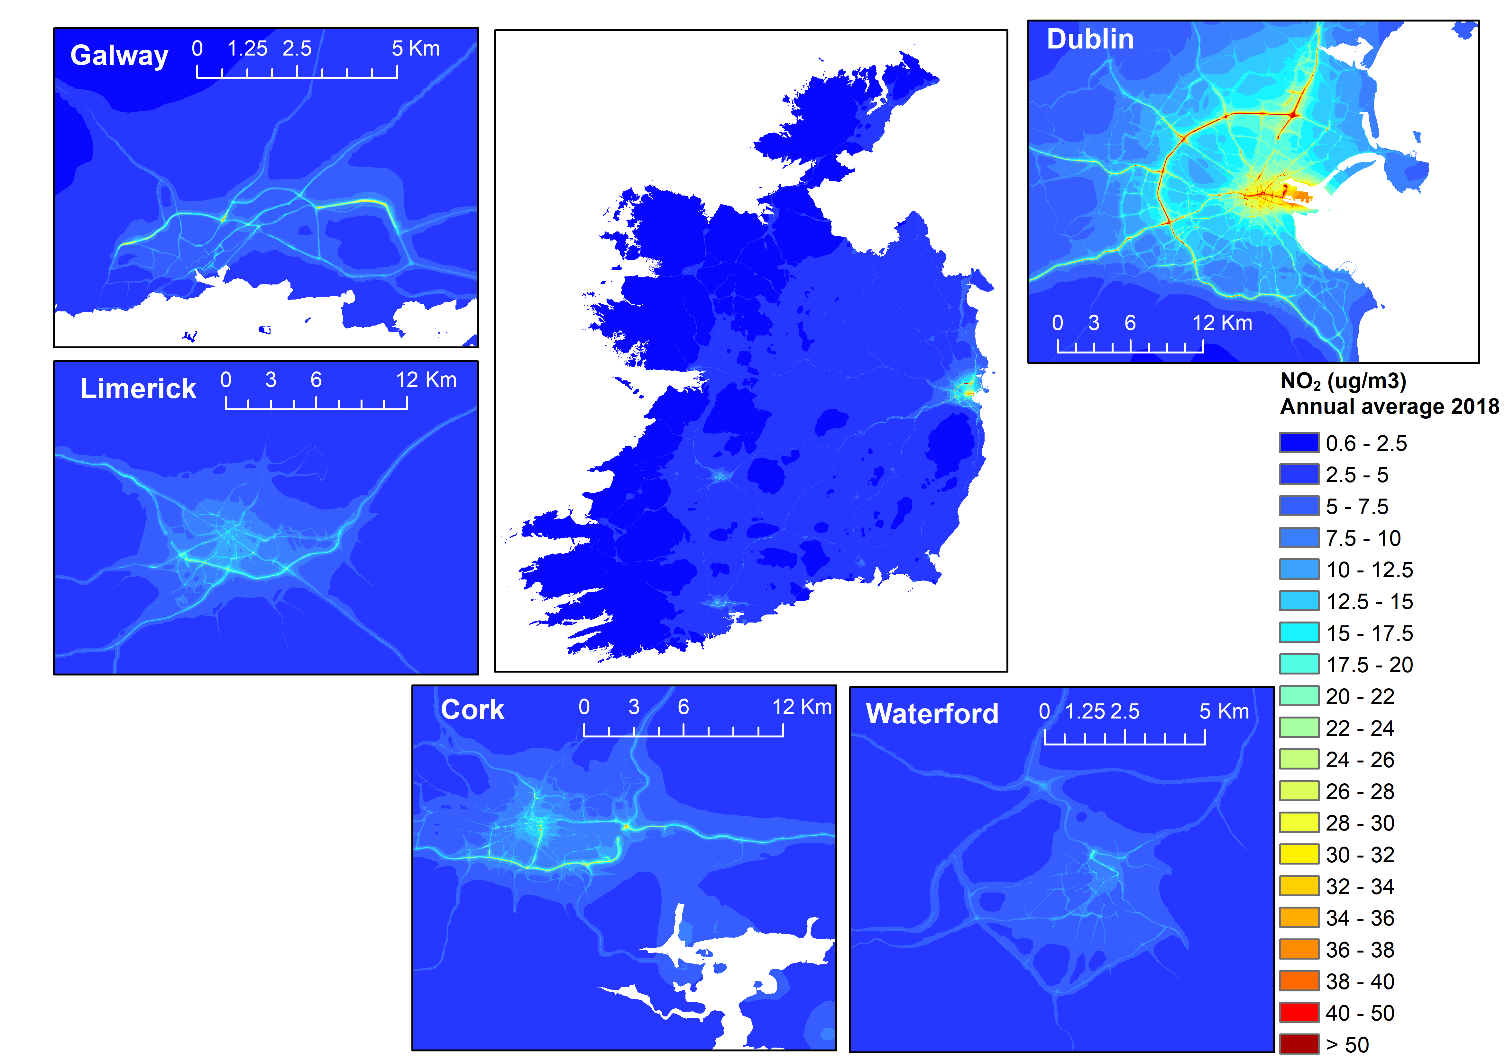 Coupled system annual average NO2 pollution maps